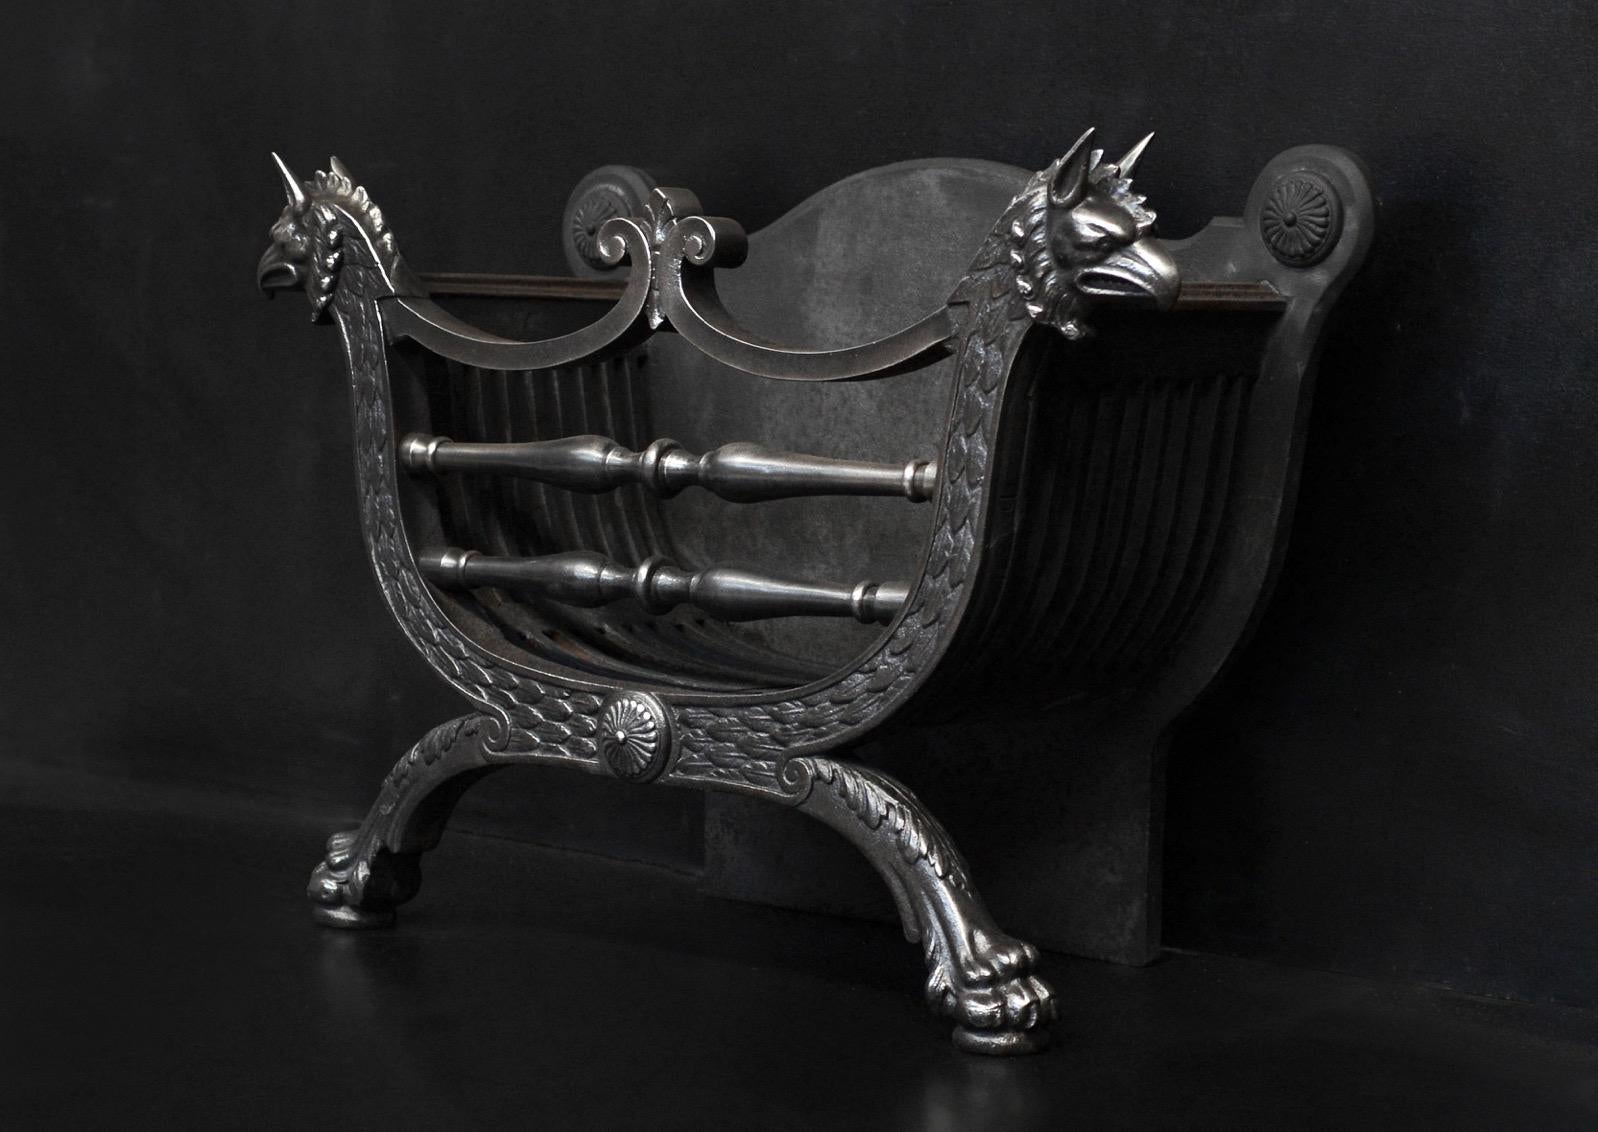 A polished cast iron firegrate. The arched base with feathers cast throughout, rosette to centre and lion's paw feet below. The burning area with shaped front bars and fleur-de-lys, flanked by cast griffin heads. Decorative cast iron fireback